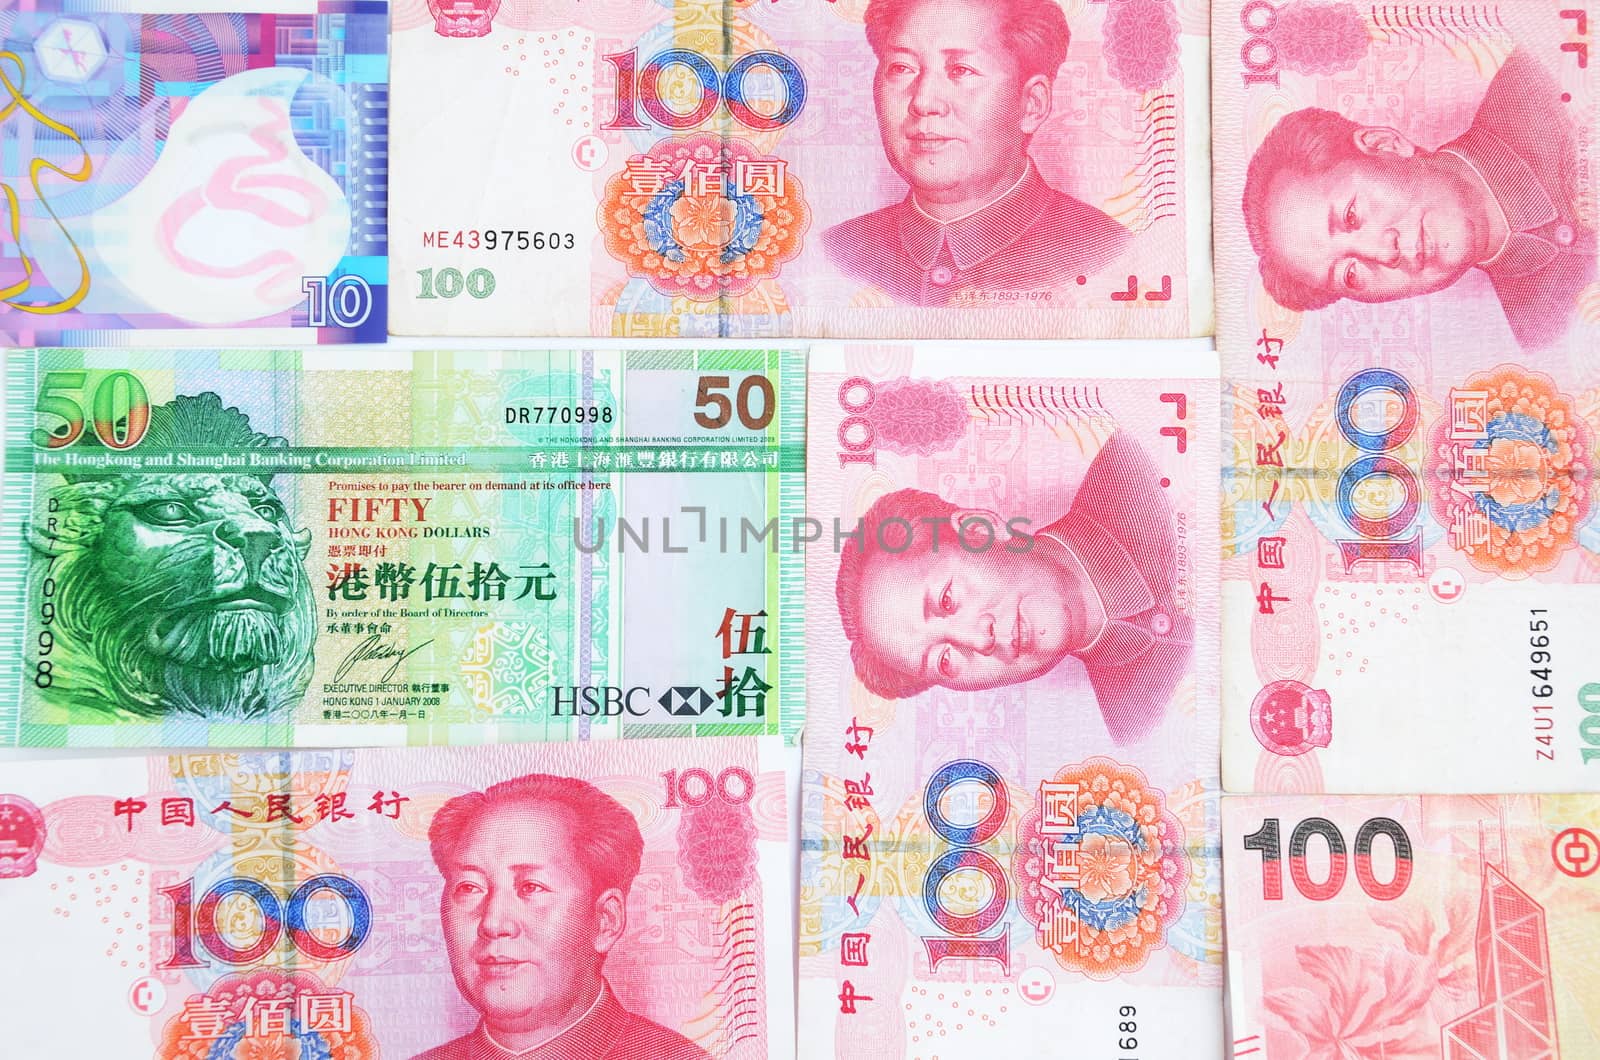 Chinese money Yuan and Hongkong dollars mixed together. Few different banknotes from Asia.